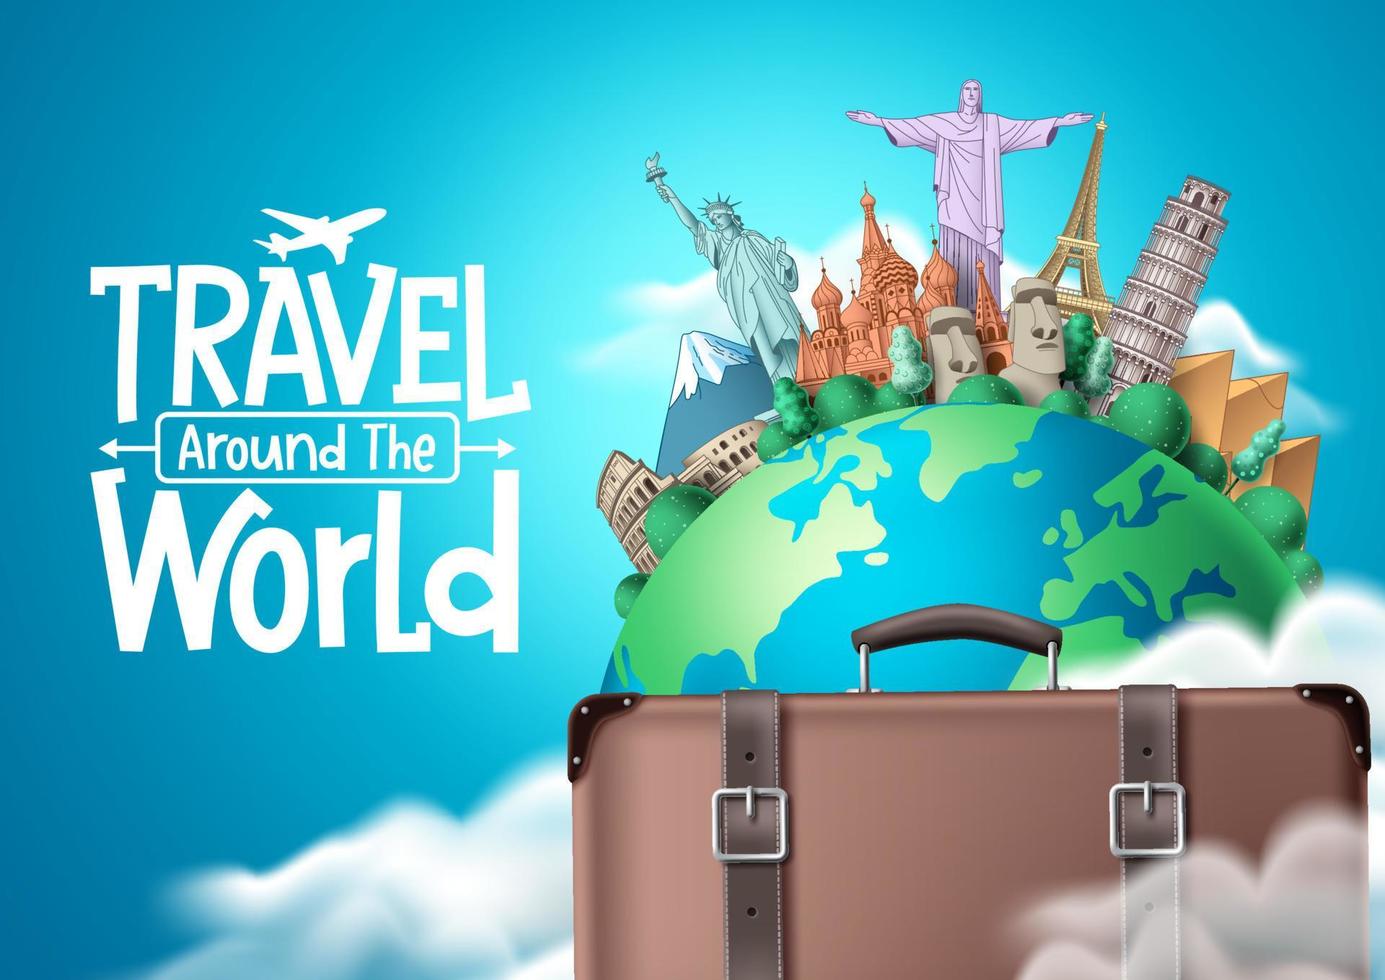 Travel the world vector design. Travel around the world text with traveler suitcase elements and worldwide landmarks destination for trip and tour vacation. Vector illustration